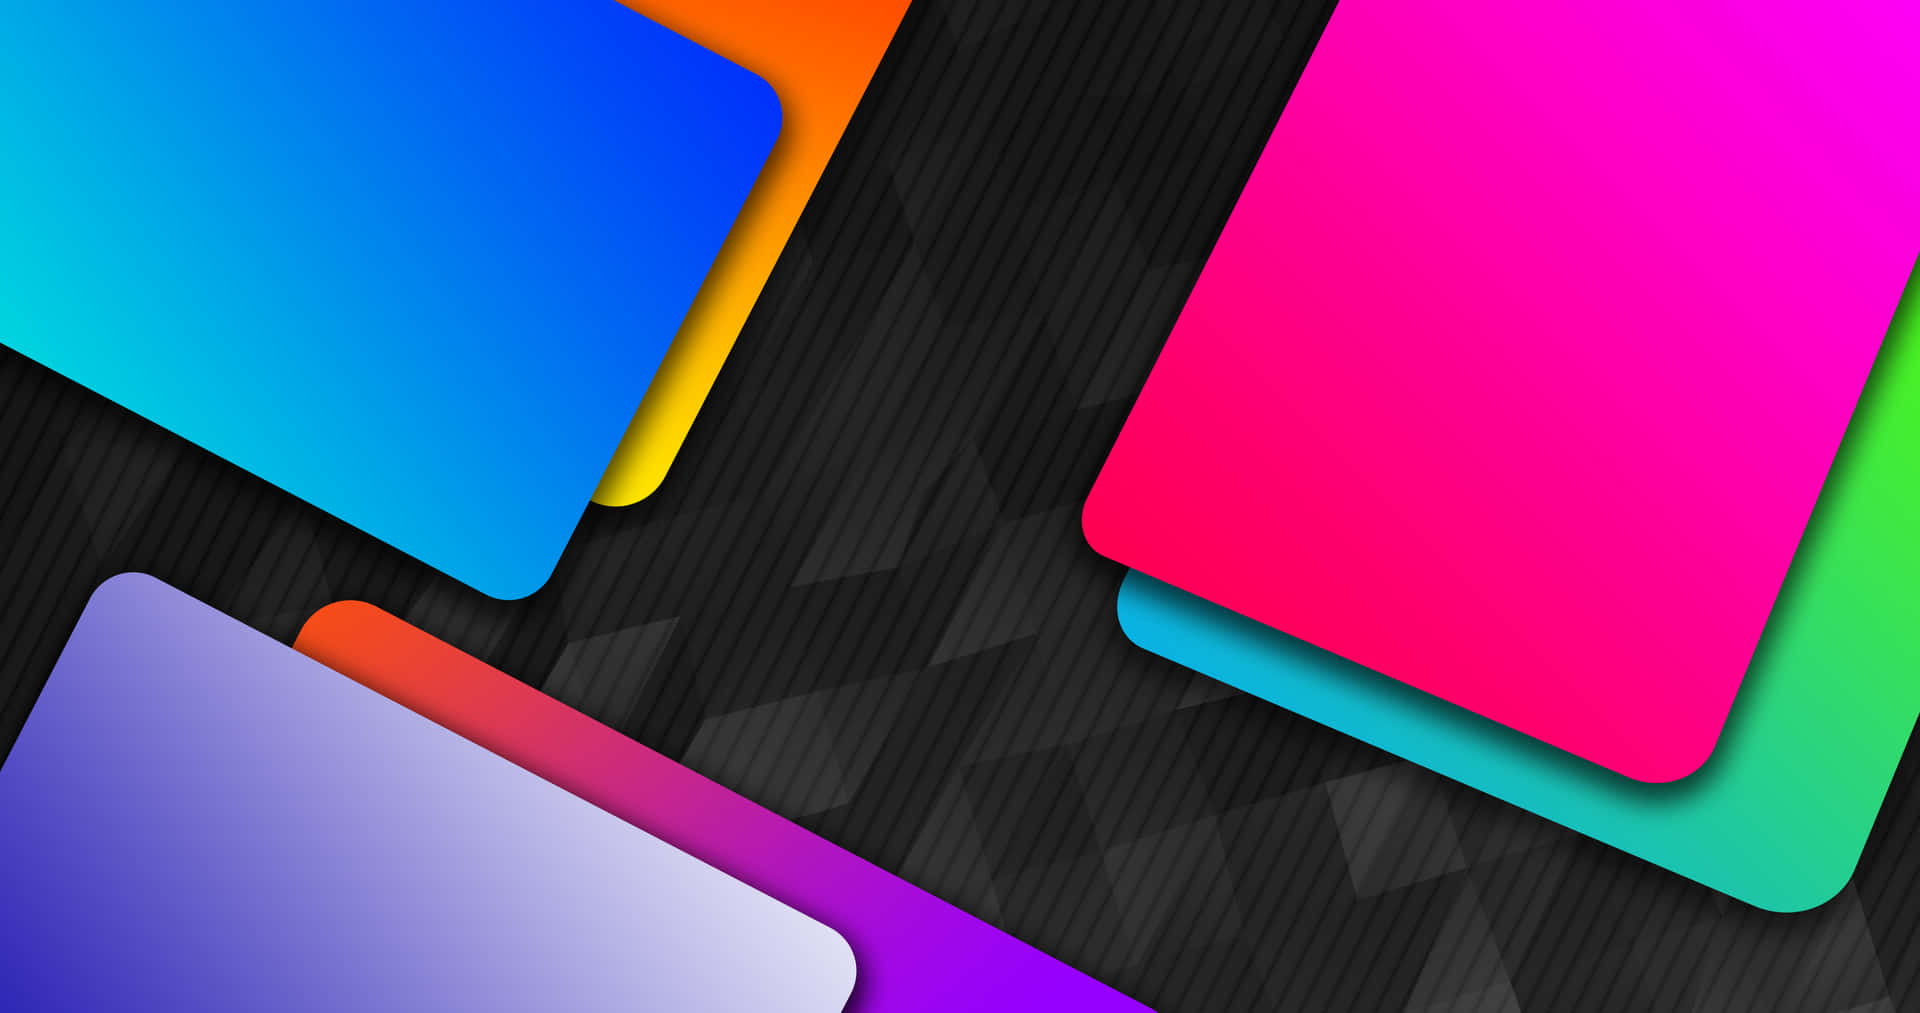 Colorful Squares On A Black Background